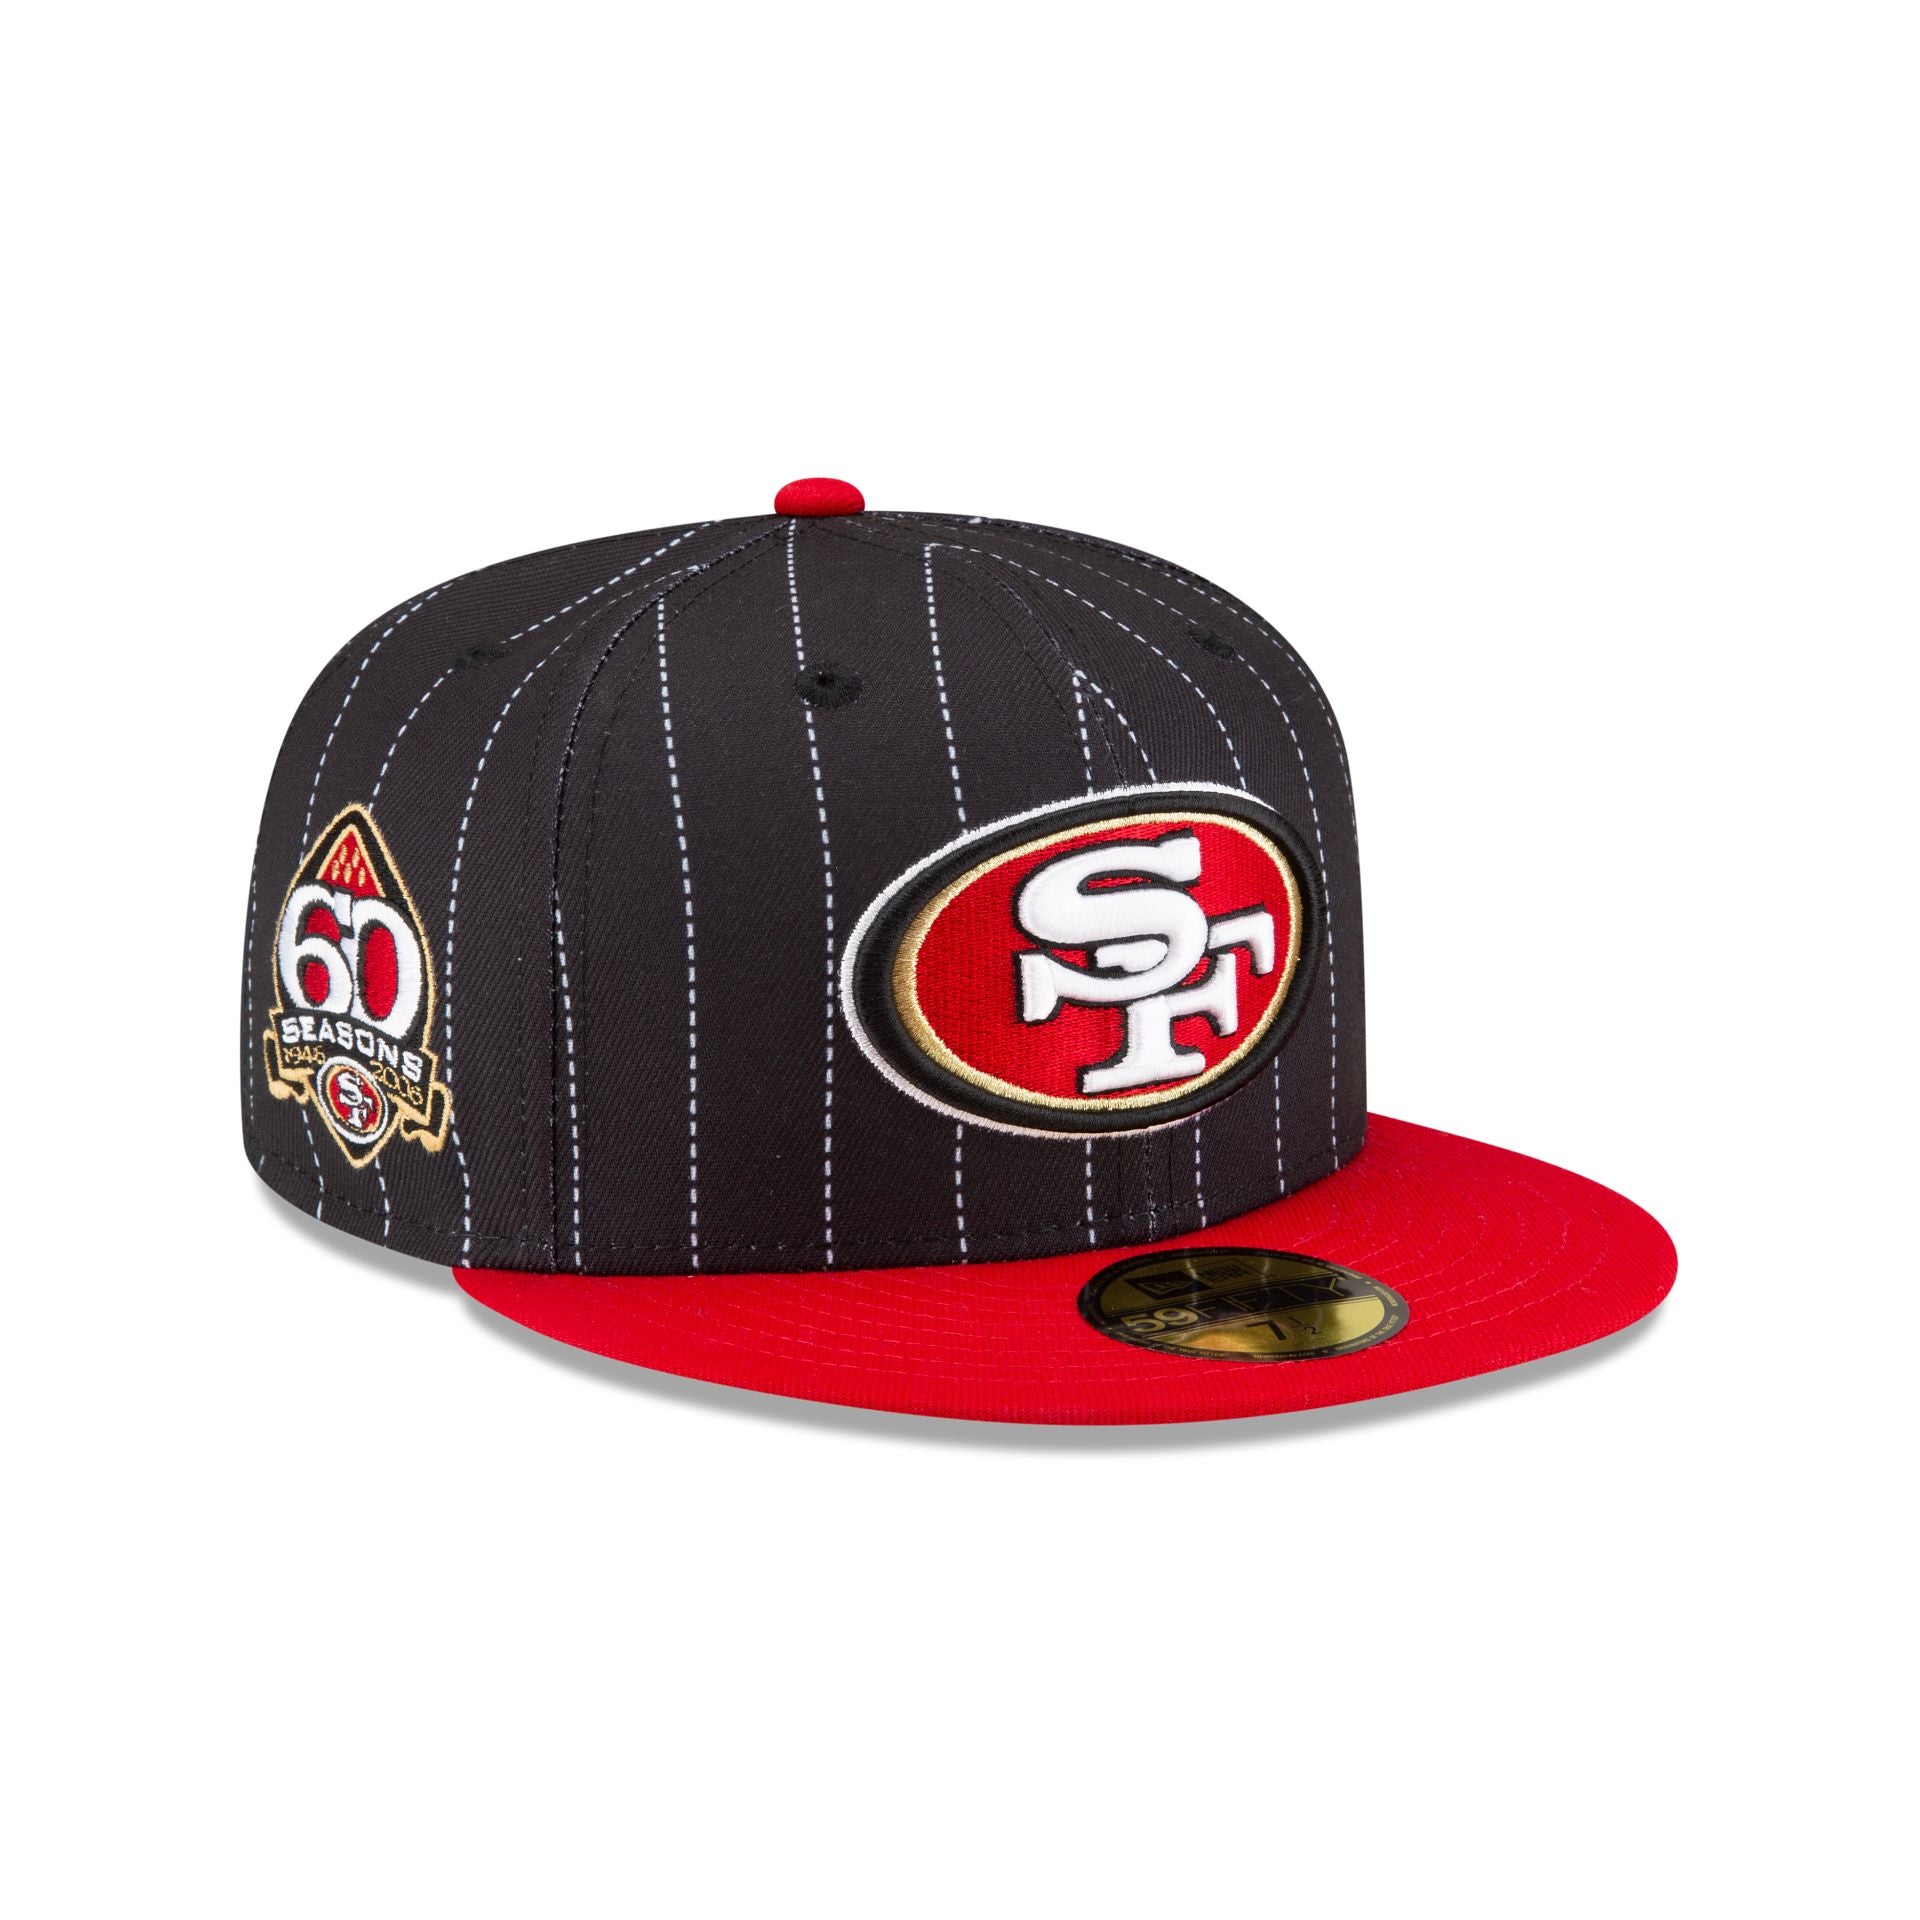 San Fransisco 49ers Super Bowl (Red) Fitted – Cap World: Embroidery